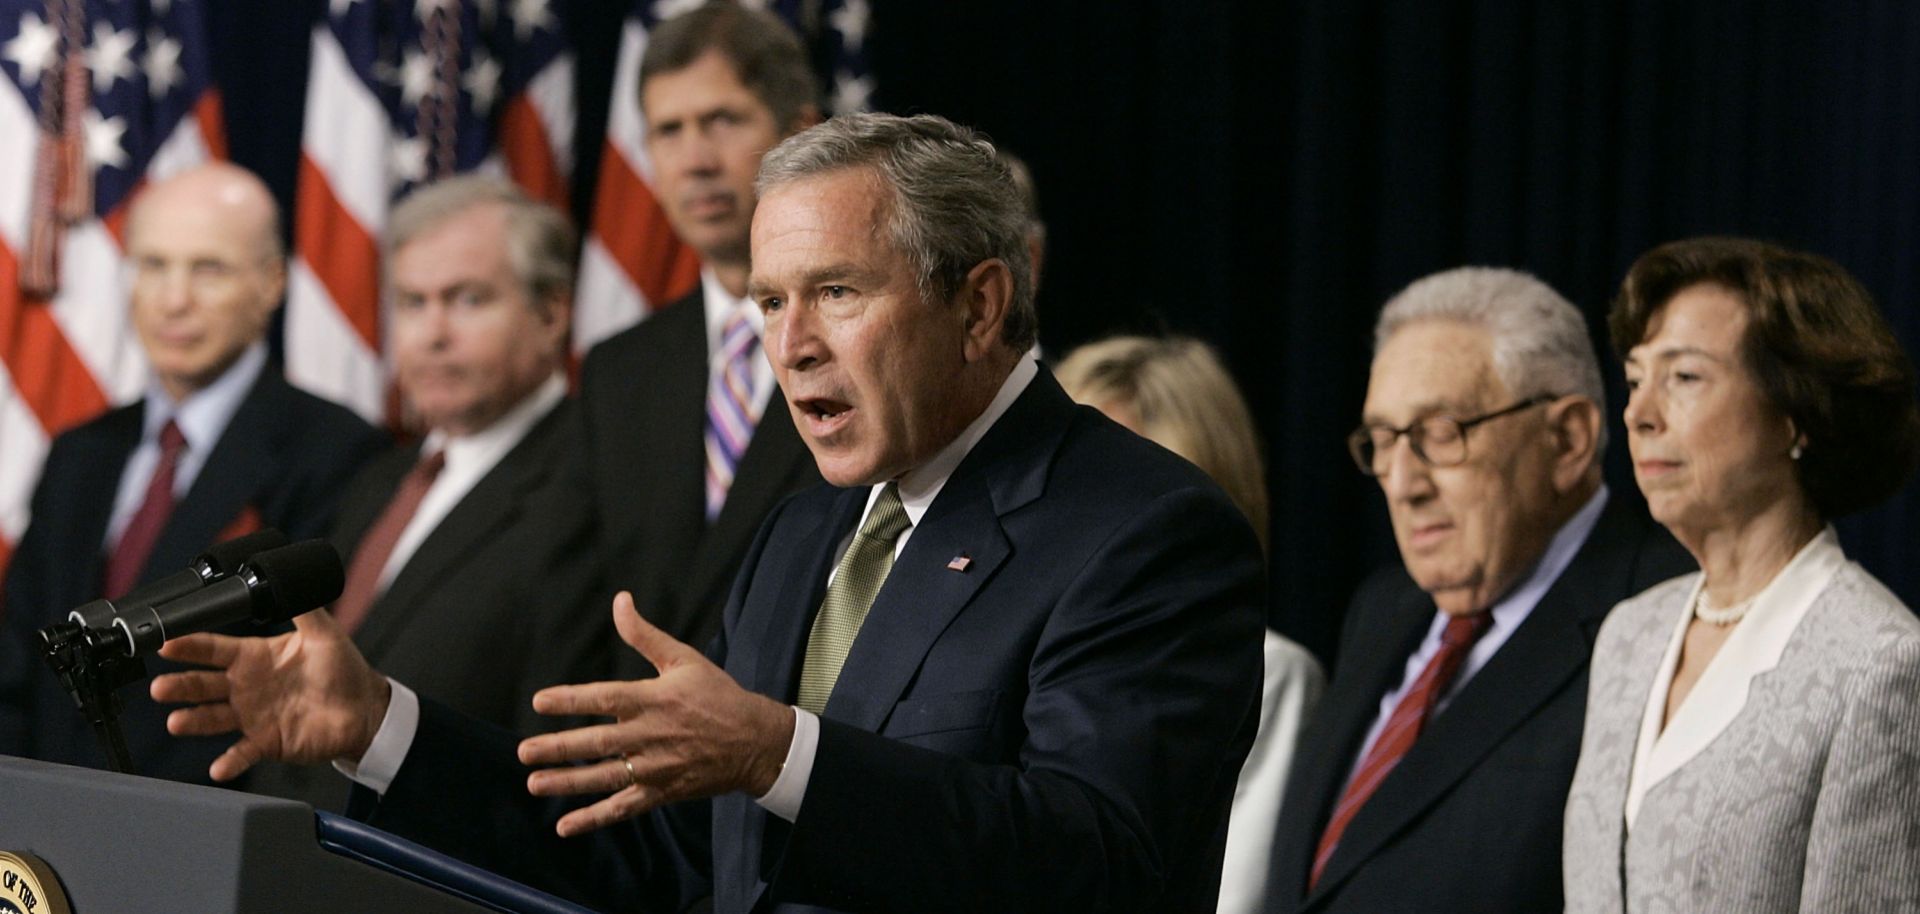 In this 2005 file photo, former U.S. President George W. Bush talks about the Central America-Dominican Republic Free Trade Agreement in Washington, joined by former Cabinet officials who supported the trade deal.